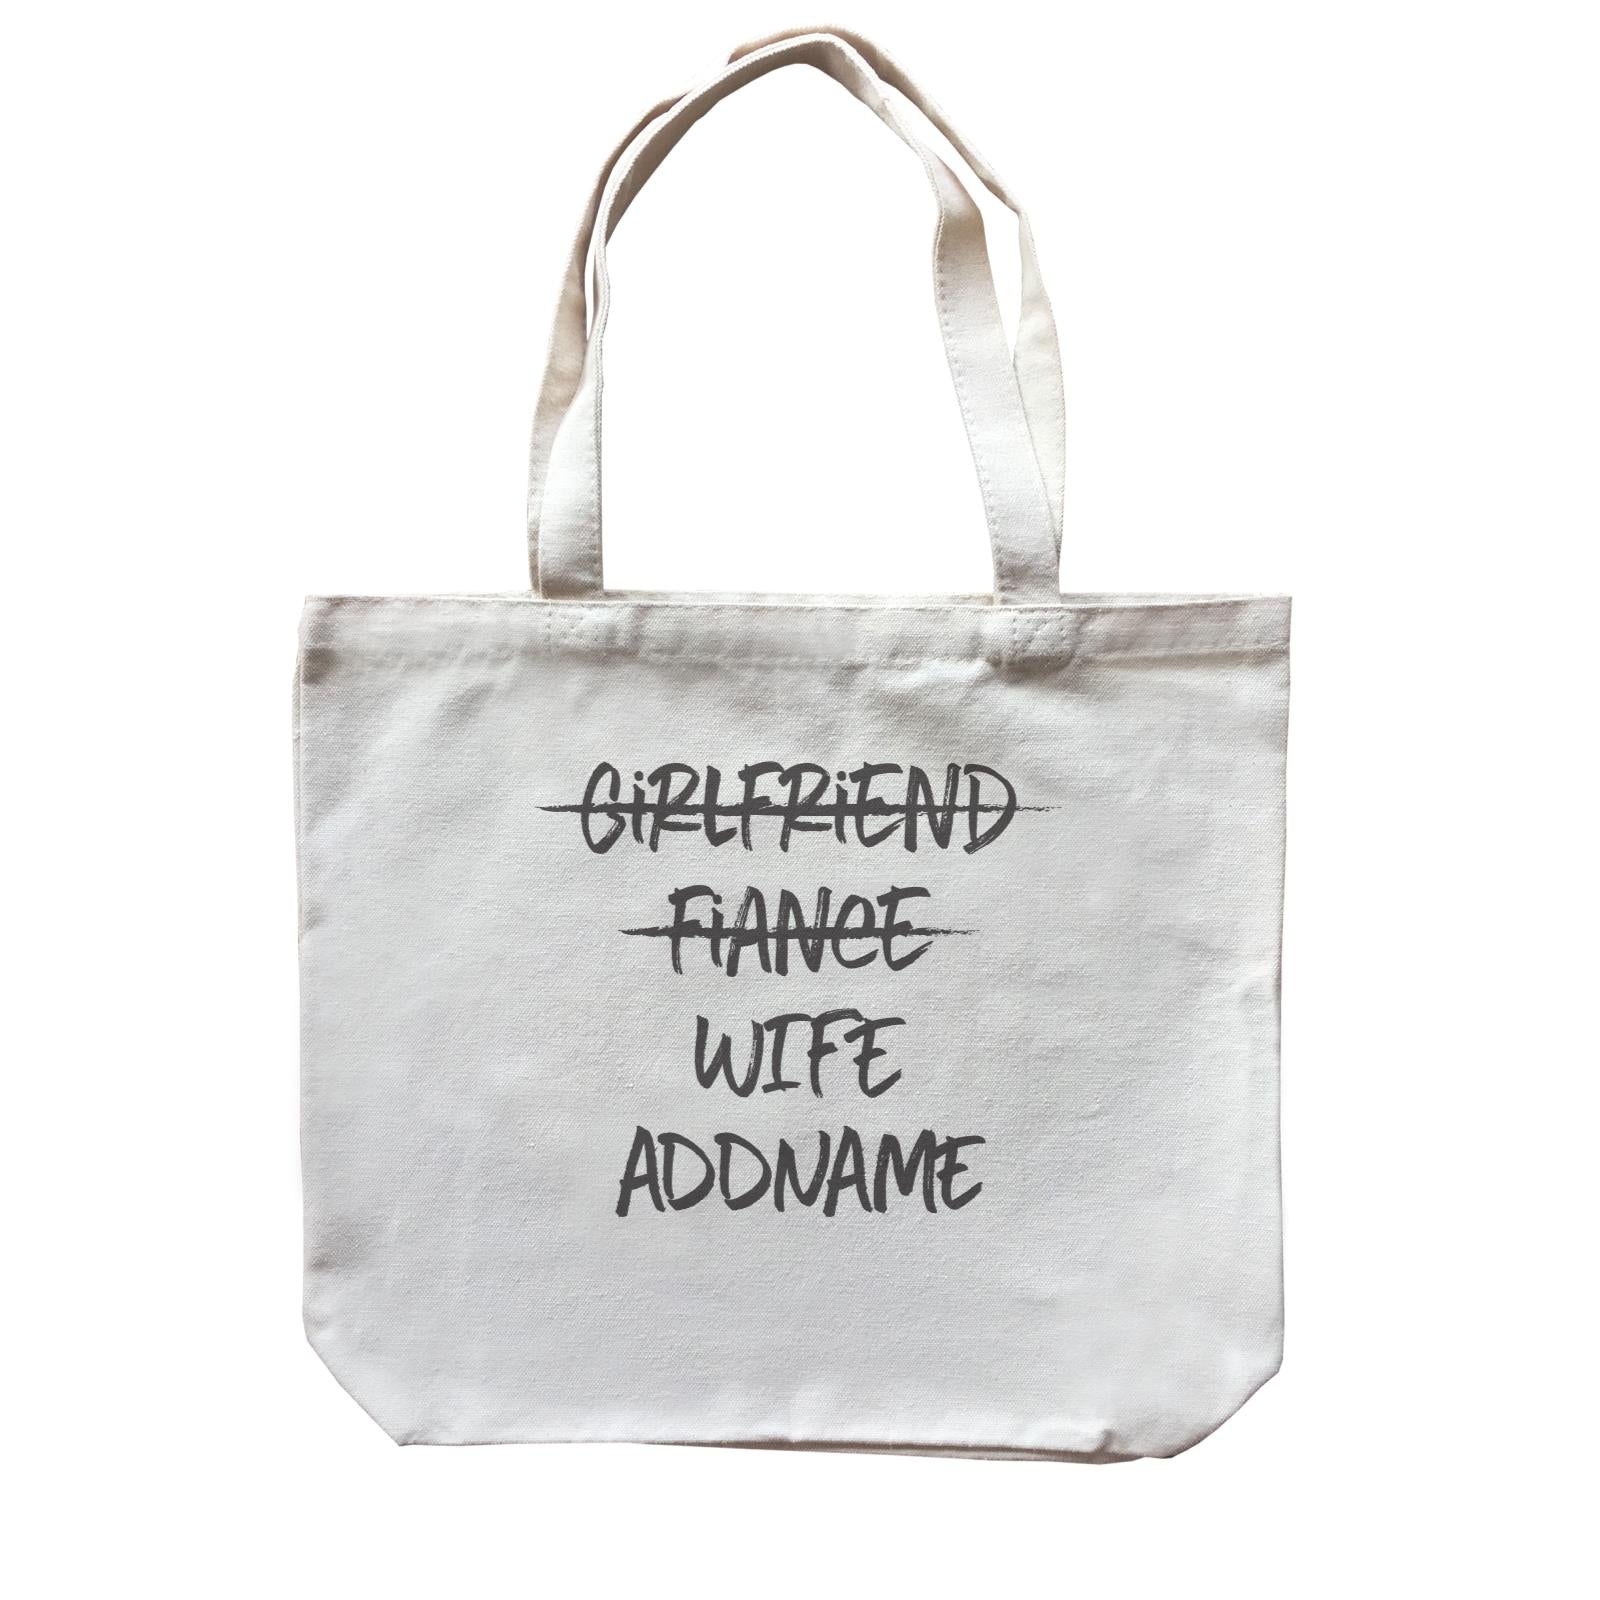 Husband and Wife Girlfriend Fiance Wife Addname Canvas Bag